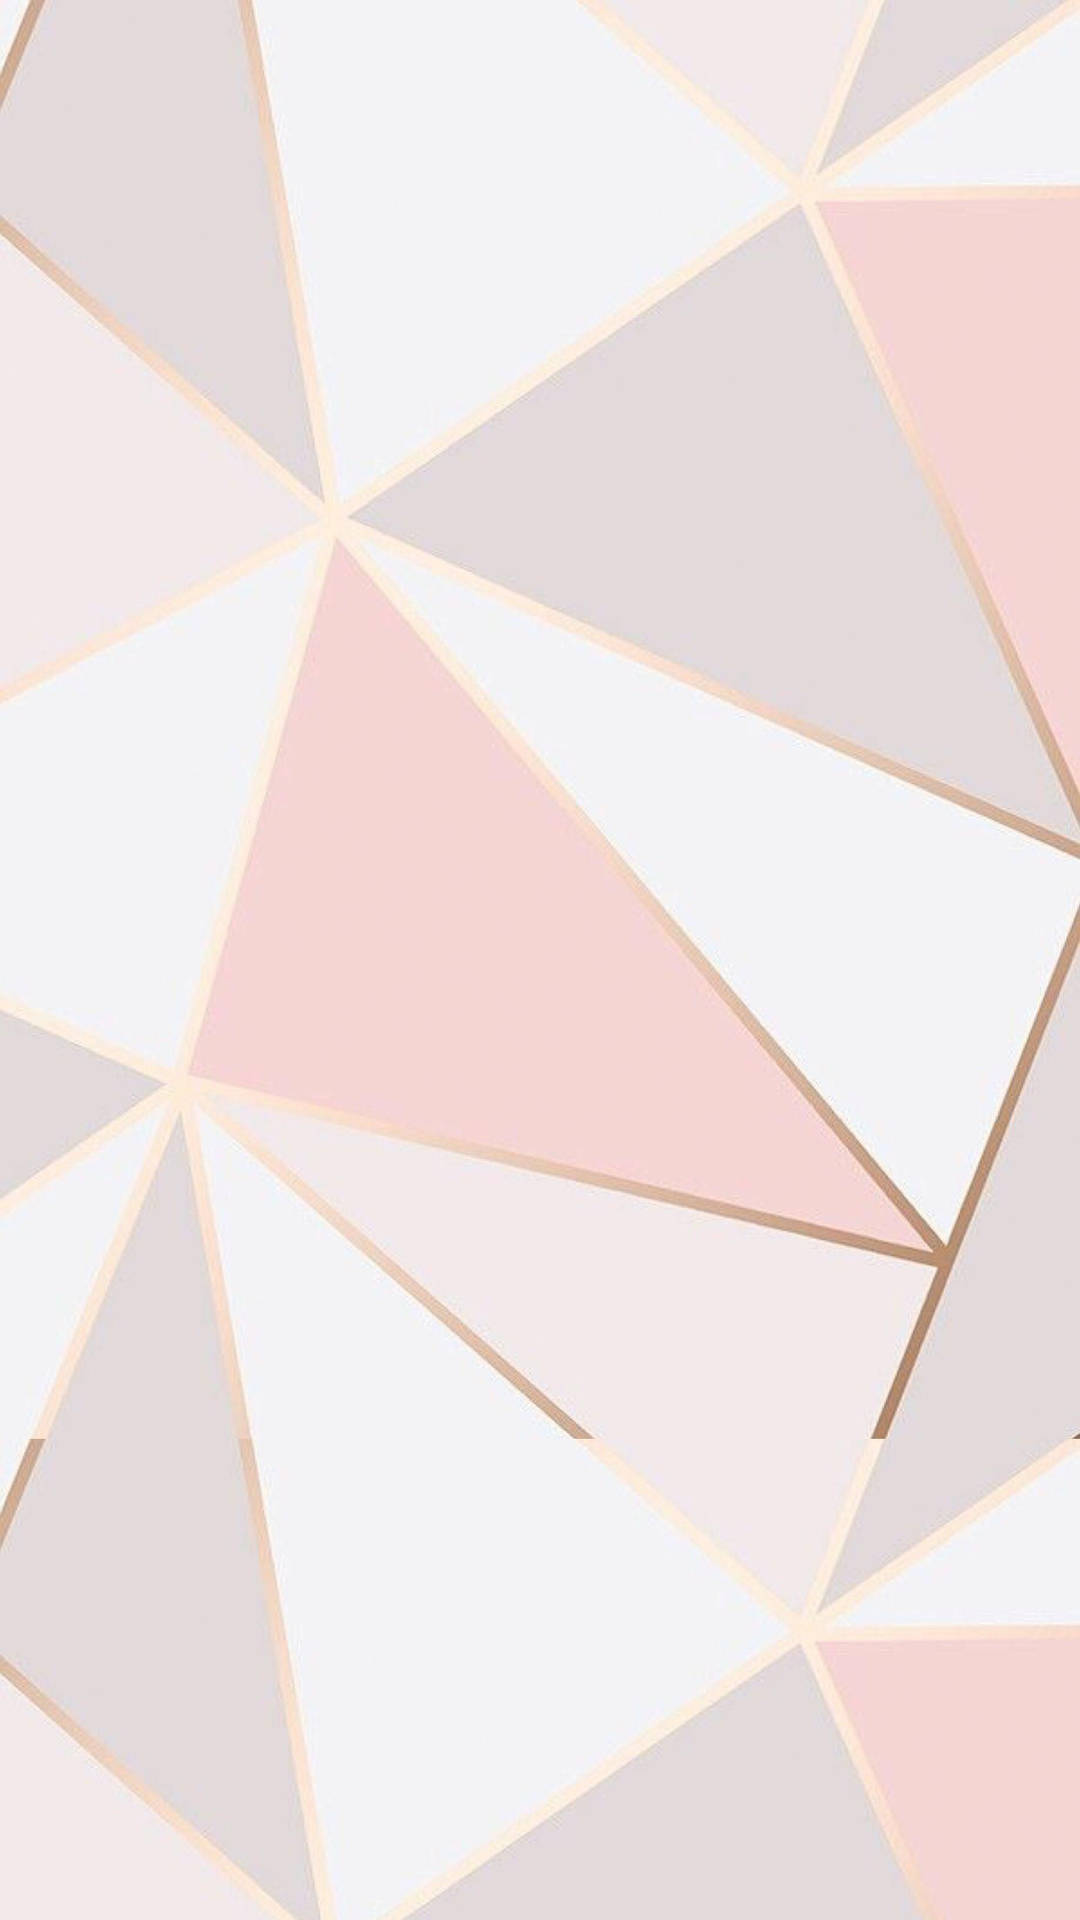 Geometric Graphic Rose Gold Iphone Background